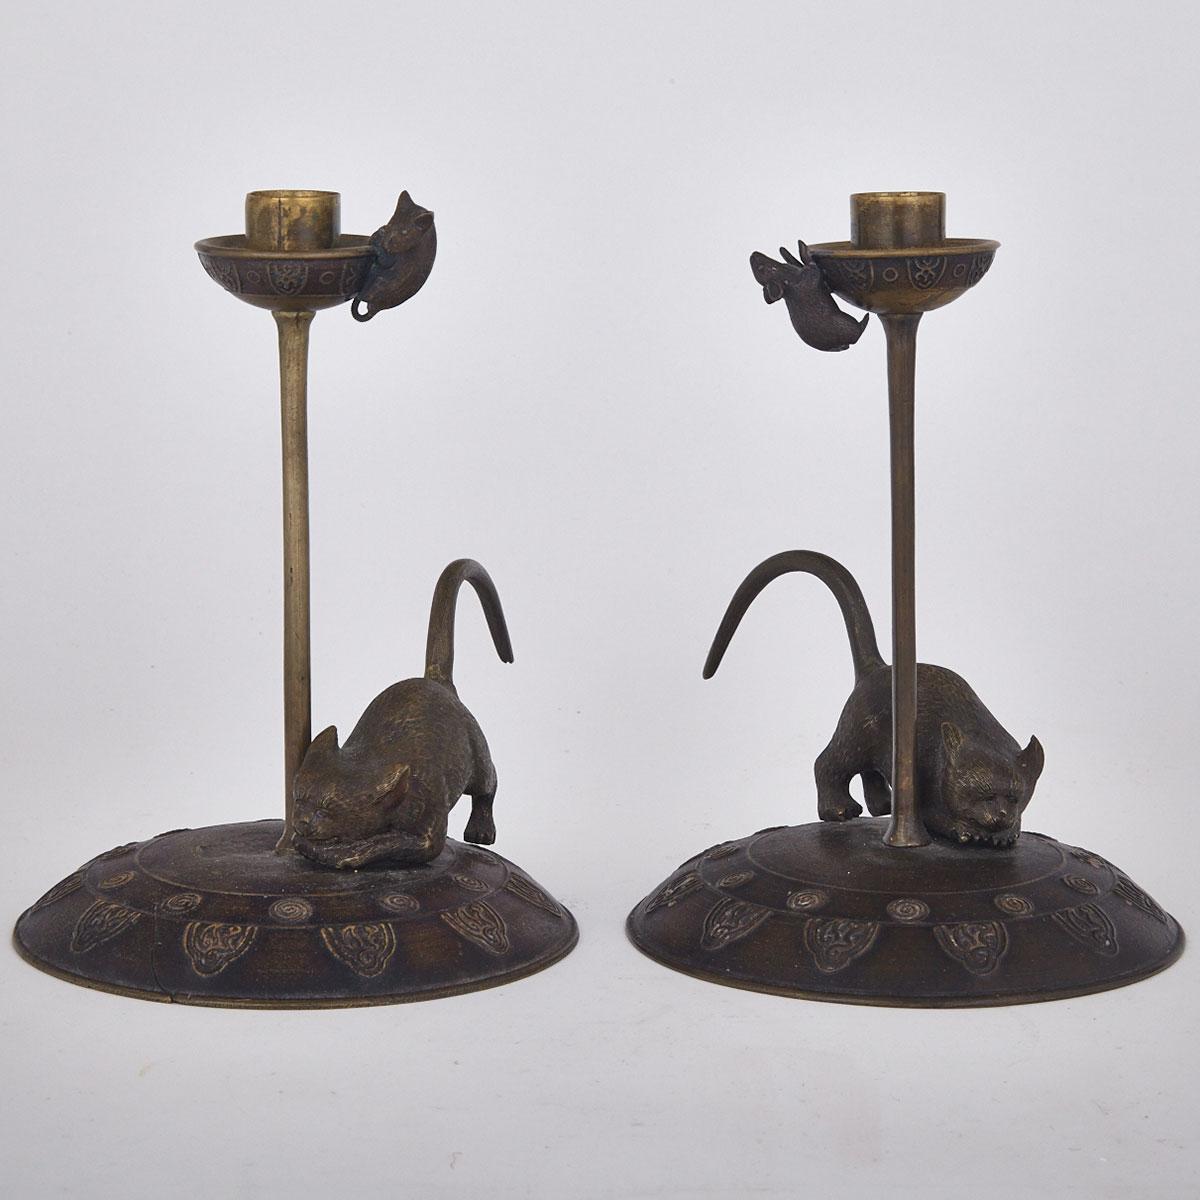 Pair of Japanese Bronze Candlesticks, early/mid 20th century